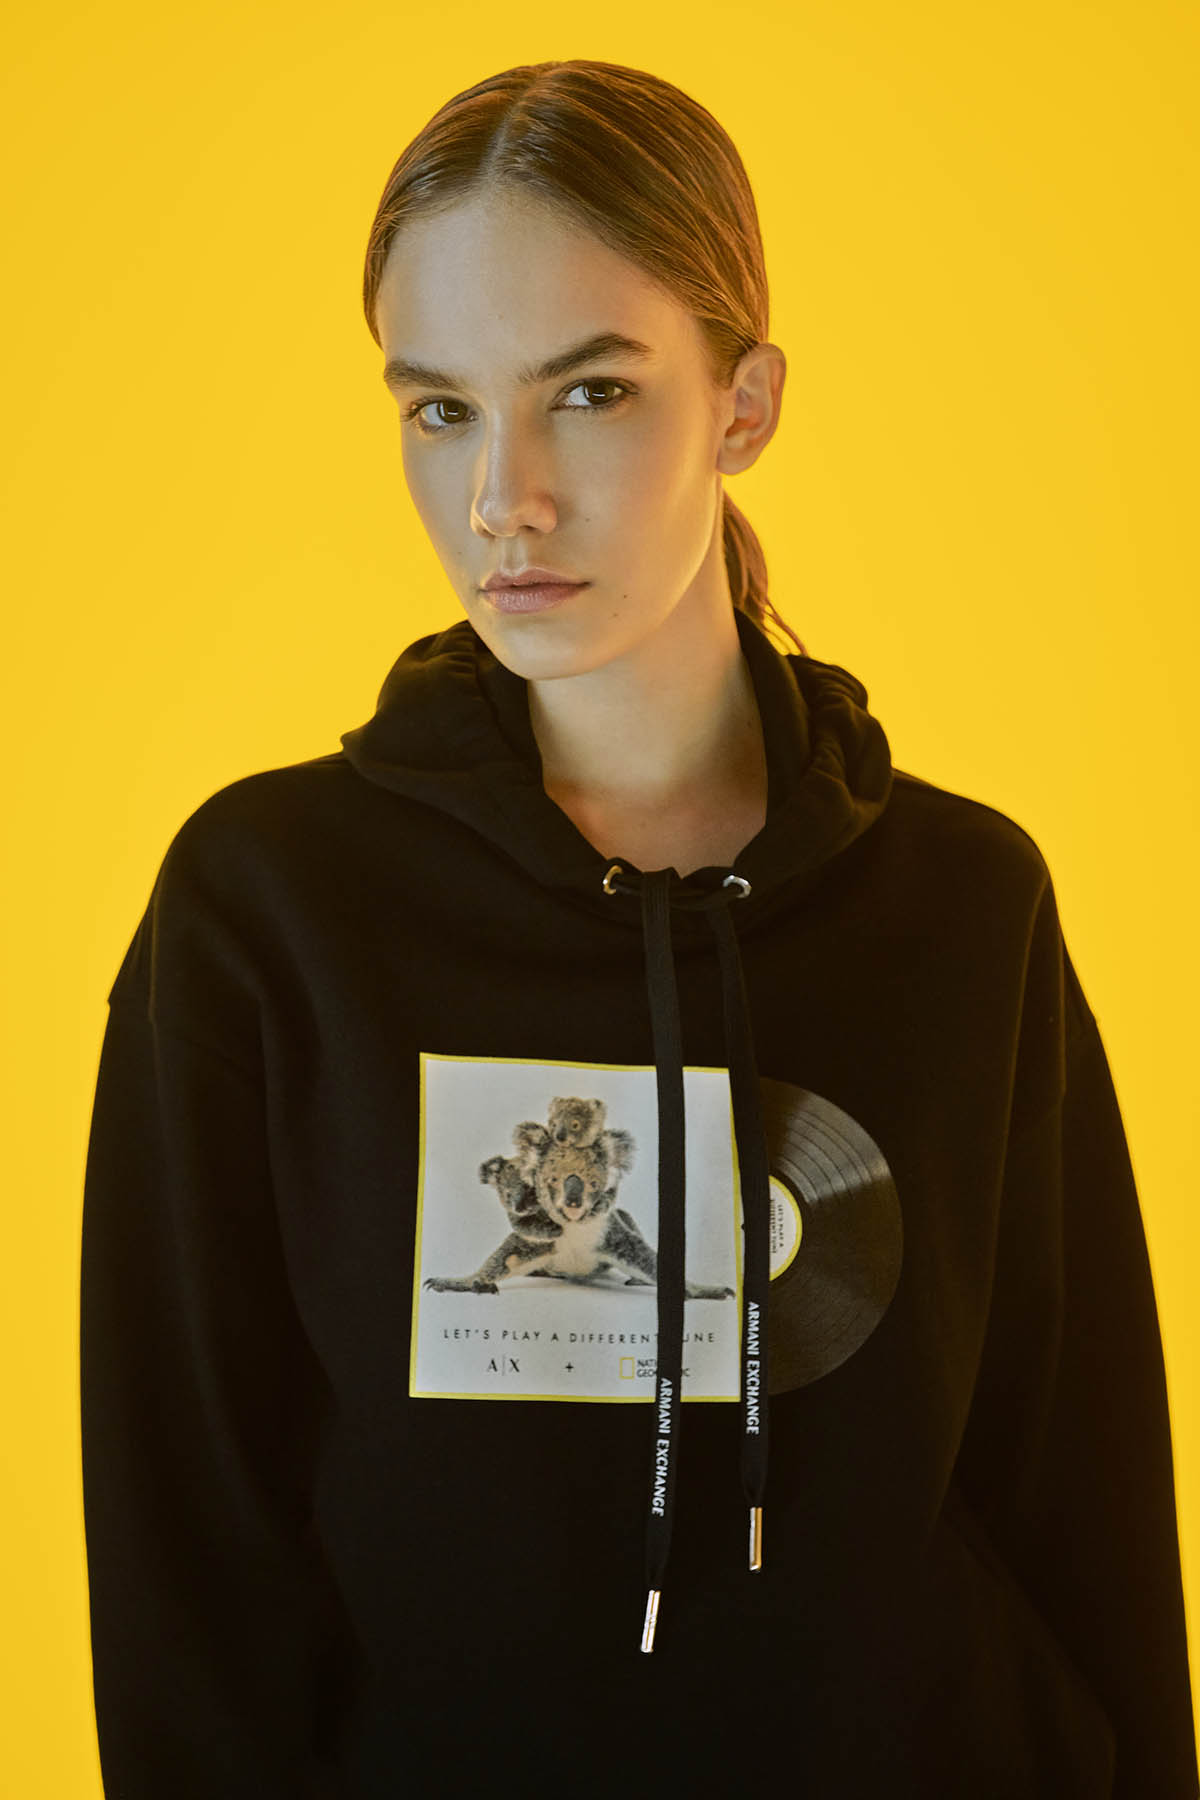 A|X Armani Exchange and National Geographic launch the second collection